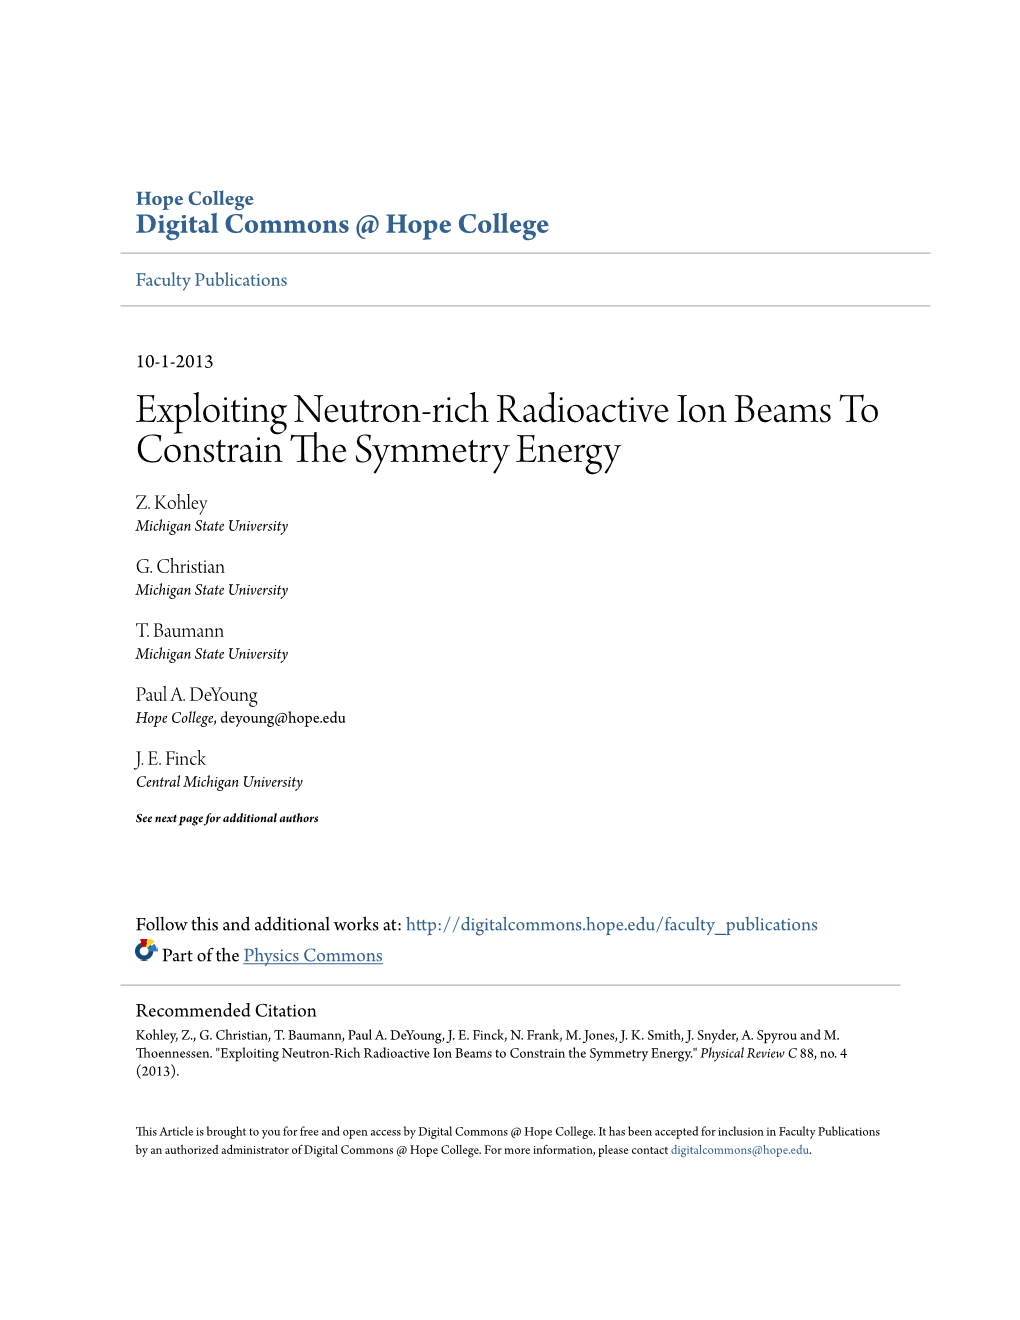 Exploiting Neutron-Rich Radioactive Ion Beams to Constrain the Ys Mmetry Energy Z